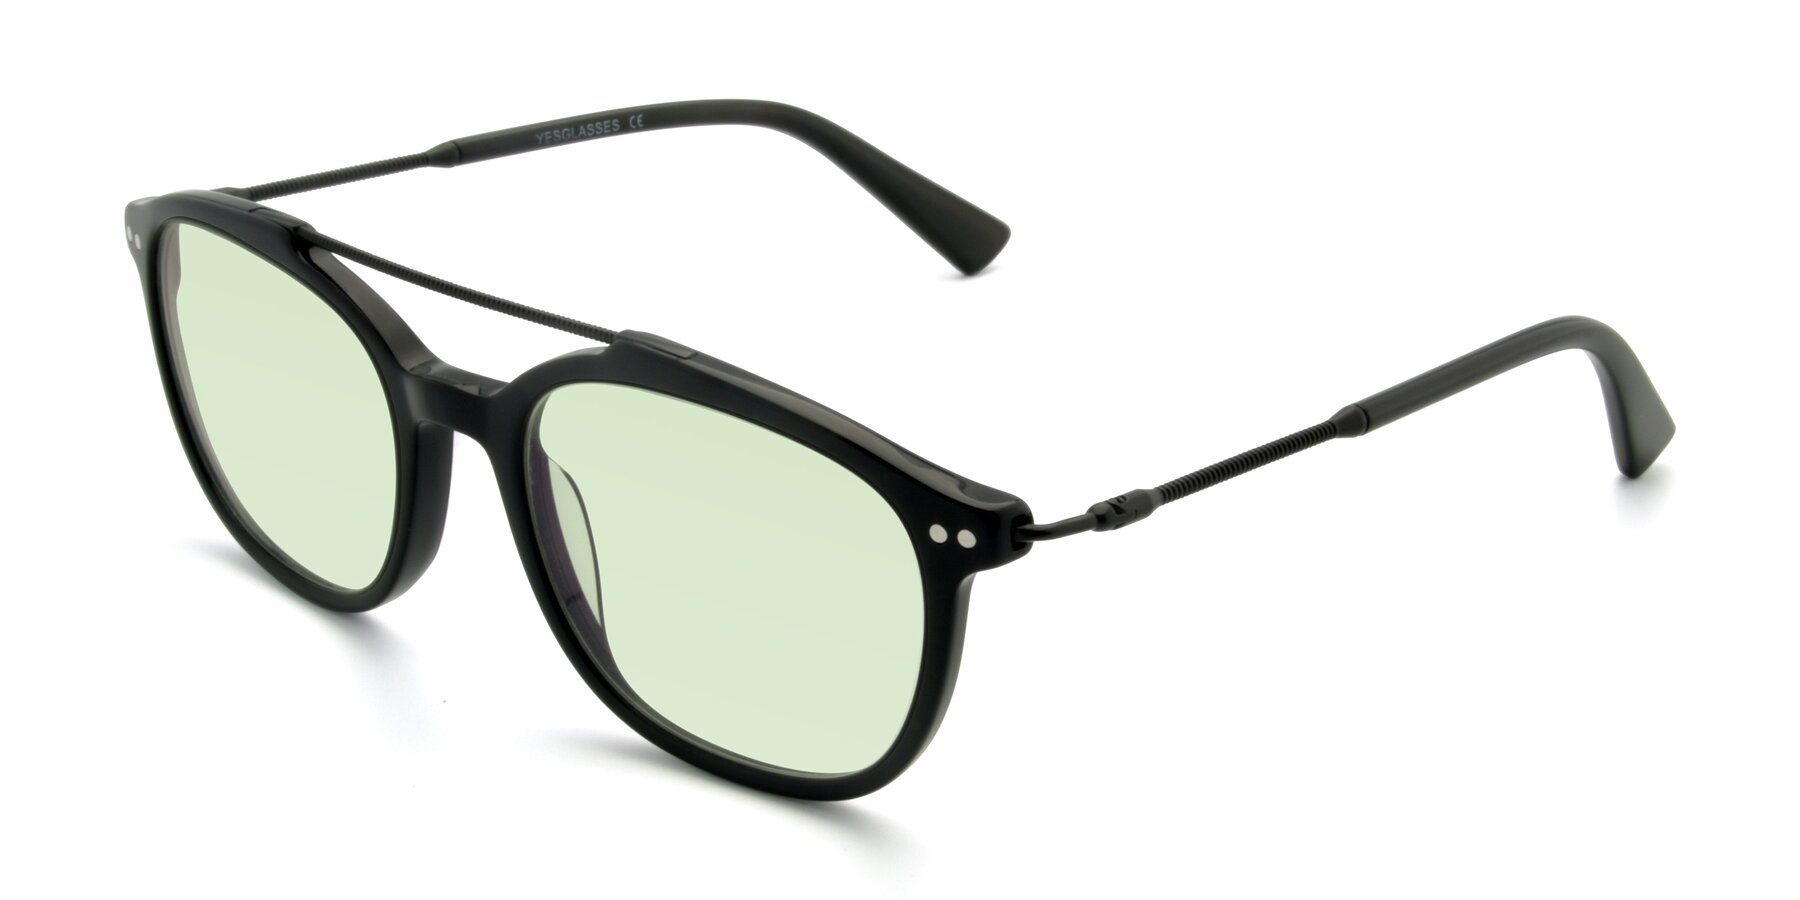 Angle of 17150 in Black with Light Green Tinted Lenses